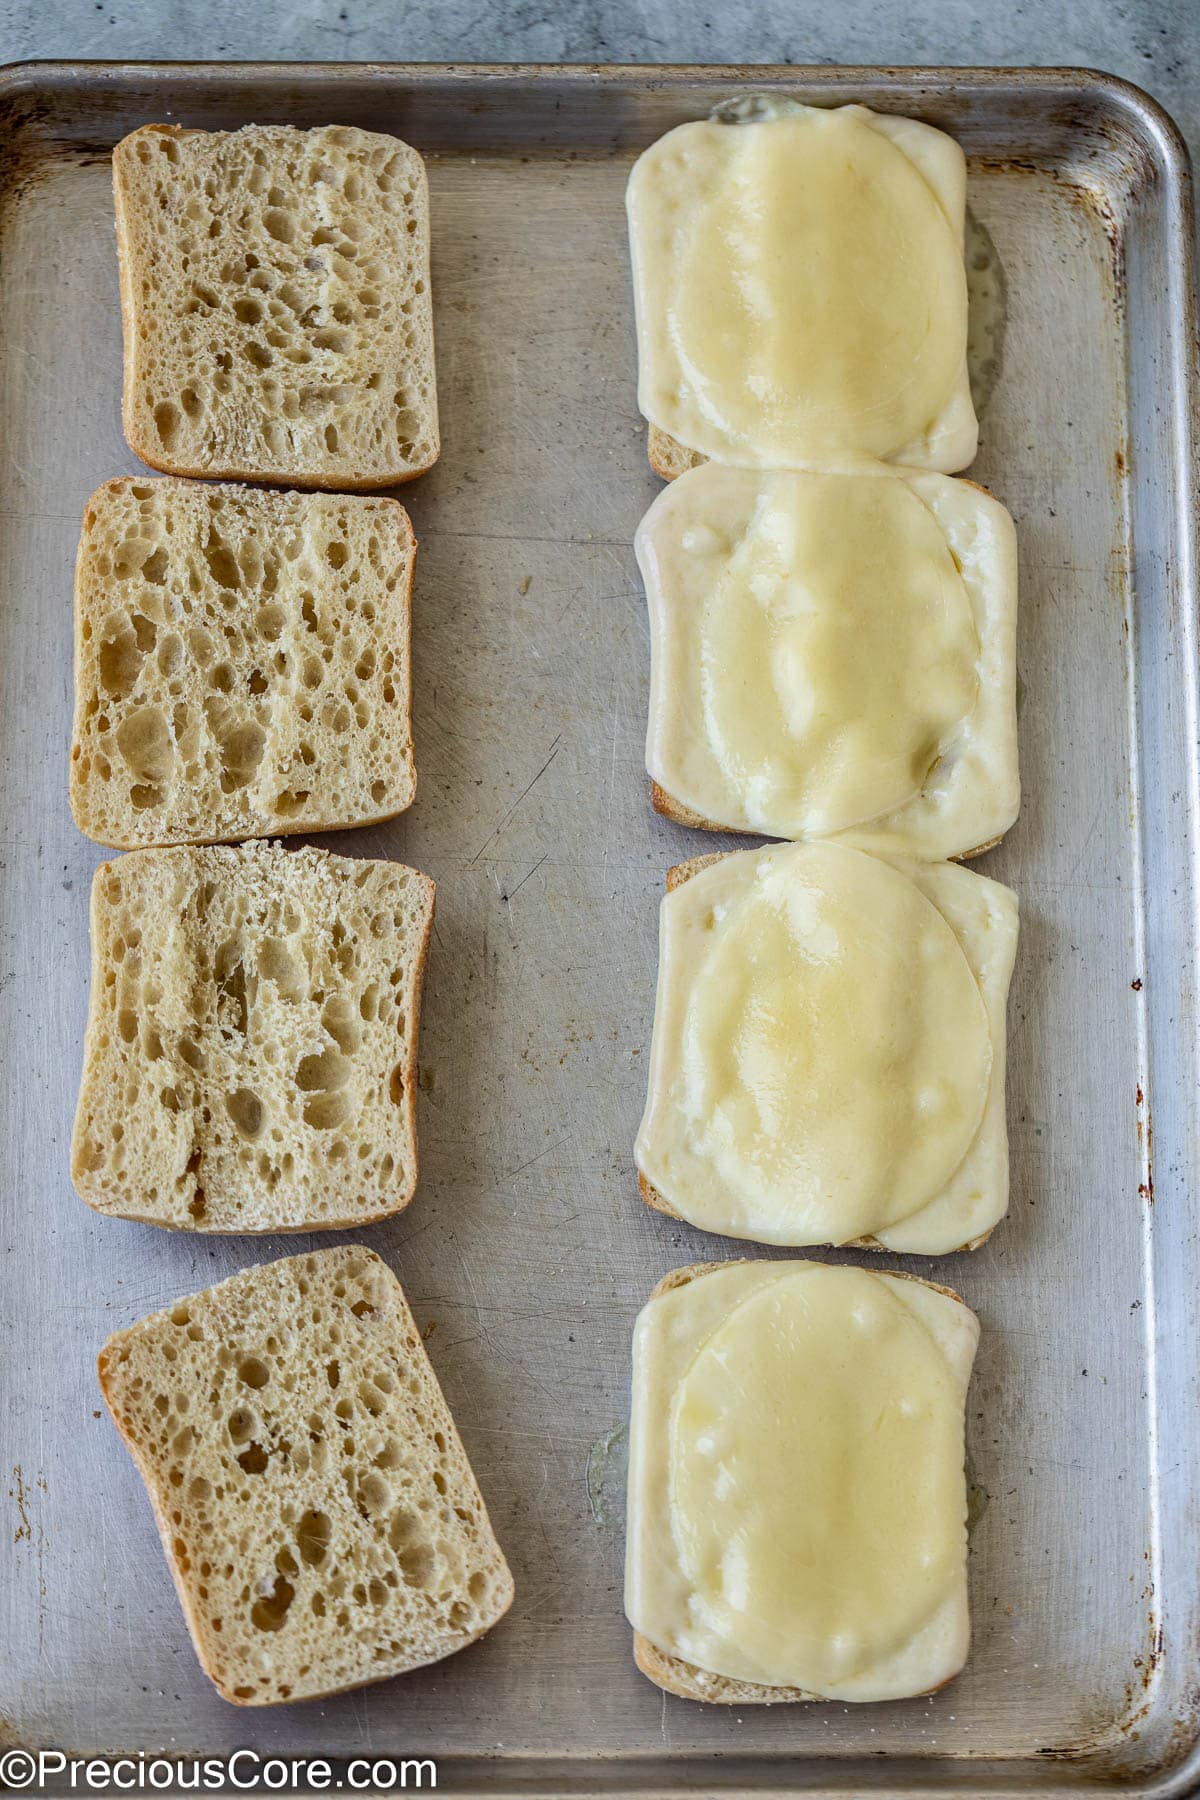 Toasted bread with melted cheese slices.